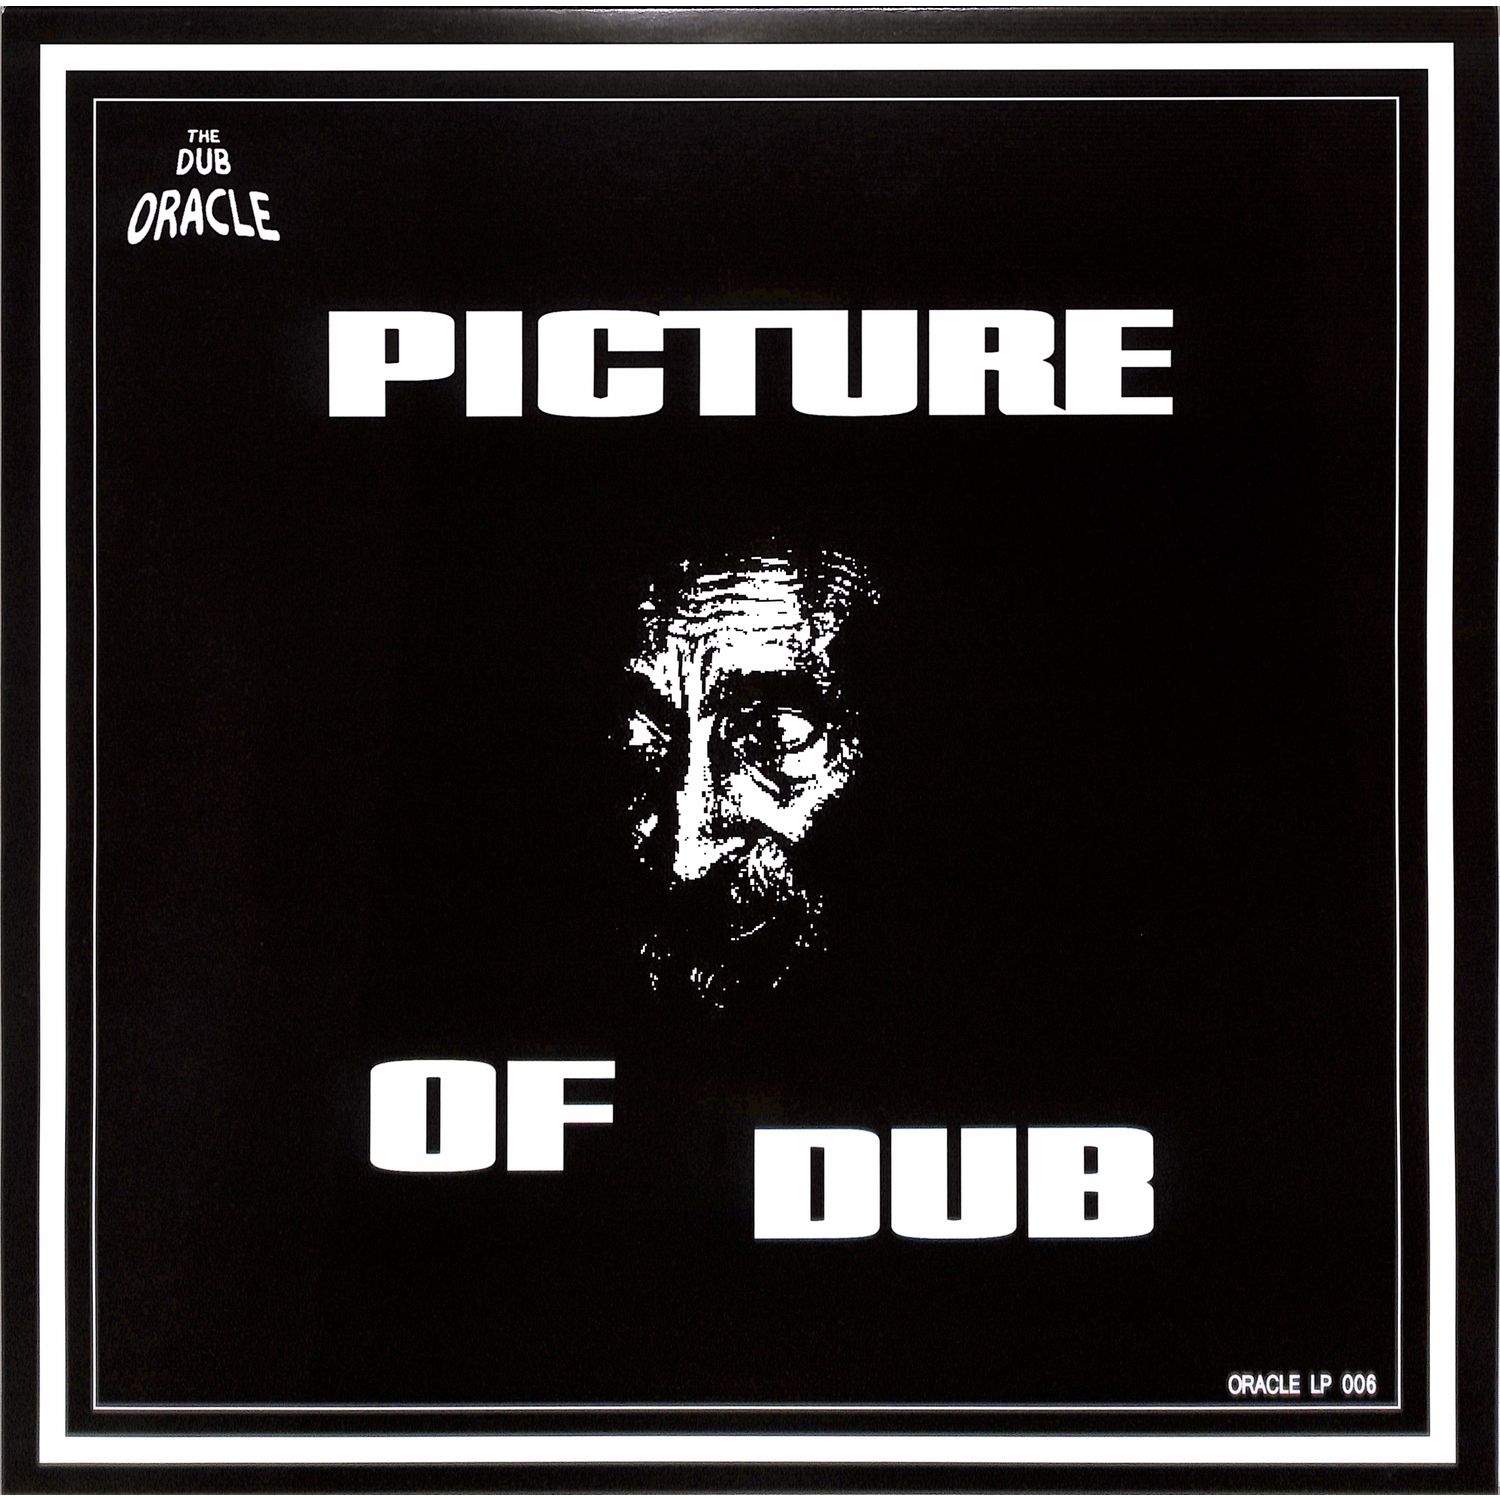 The Dub Oracle - PICTURE OF DUB 